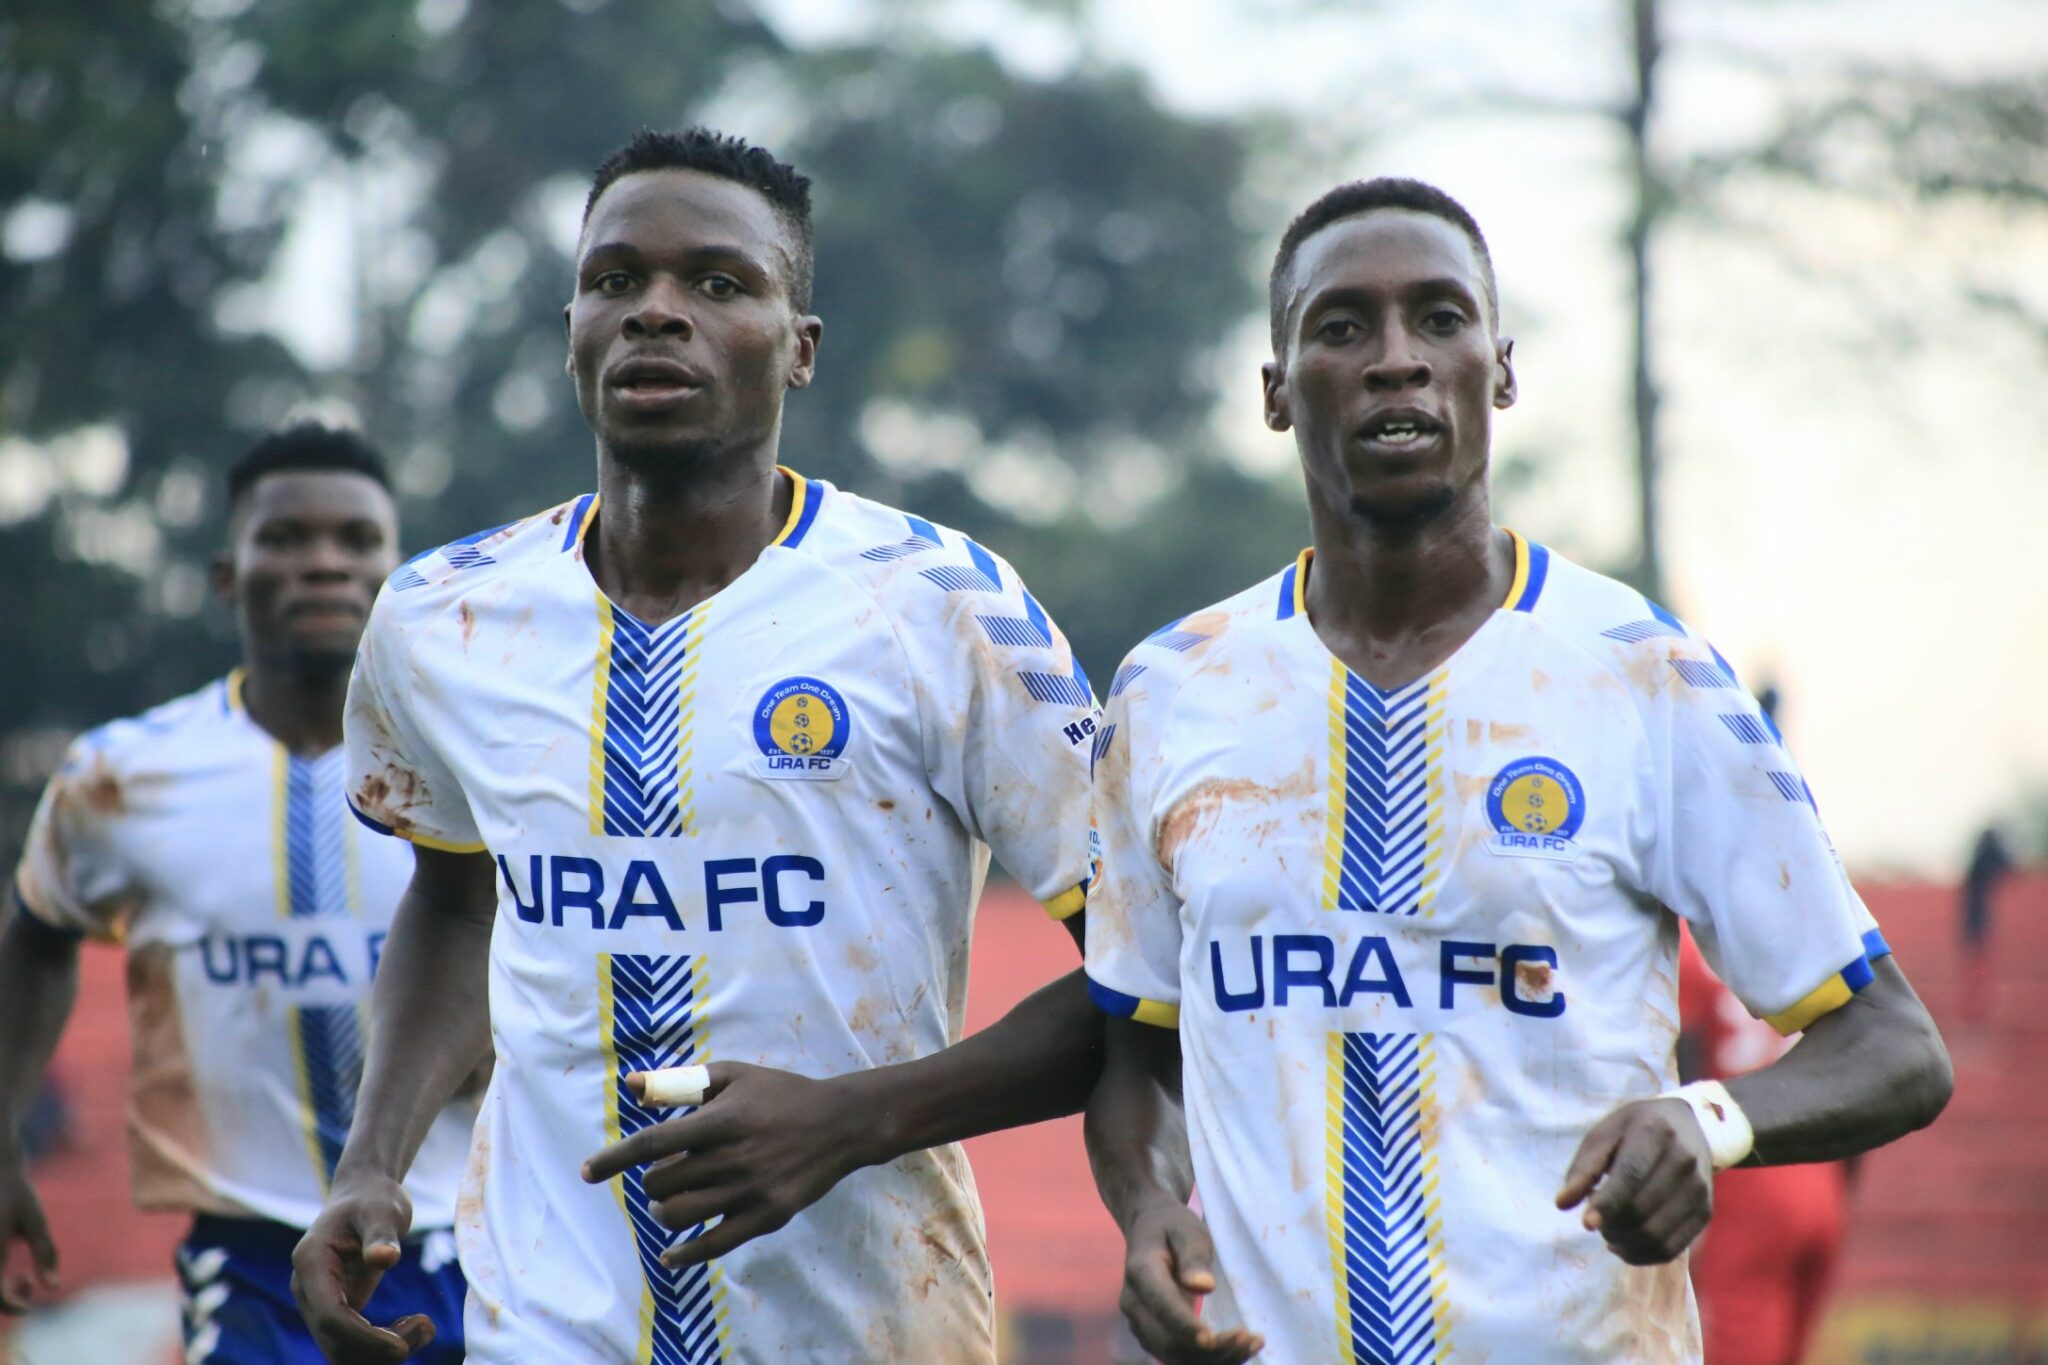 URA FC Arrest Busoga United to Collect First Win of the Season